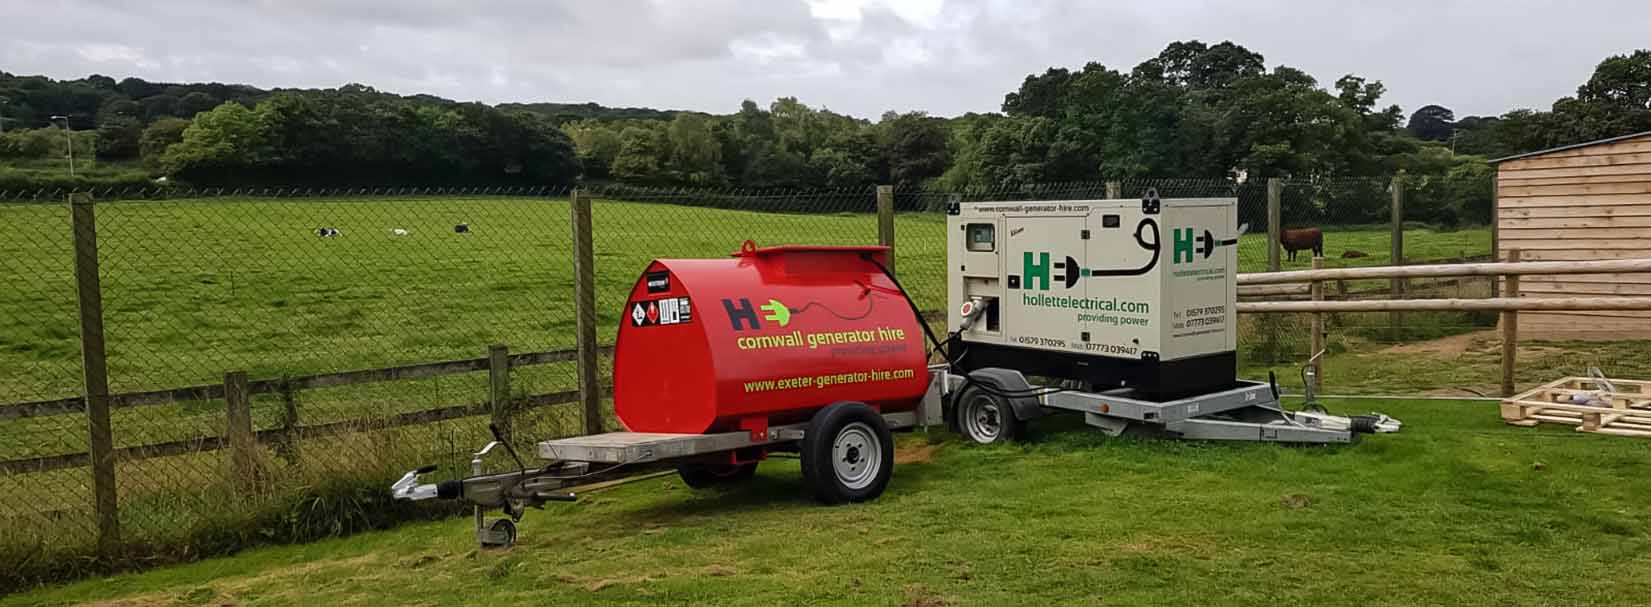 Fuel bowser hire from Exeter generator hire